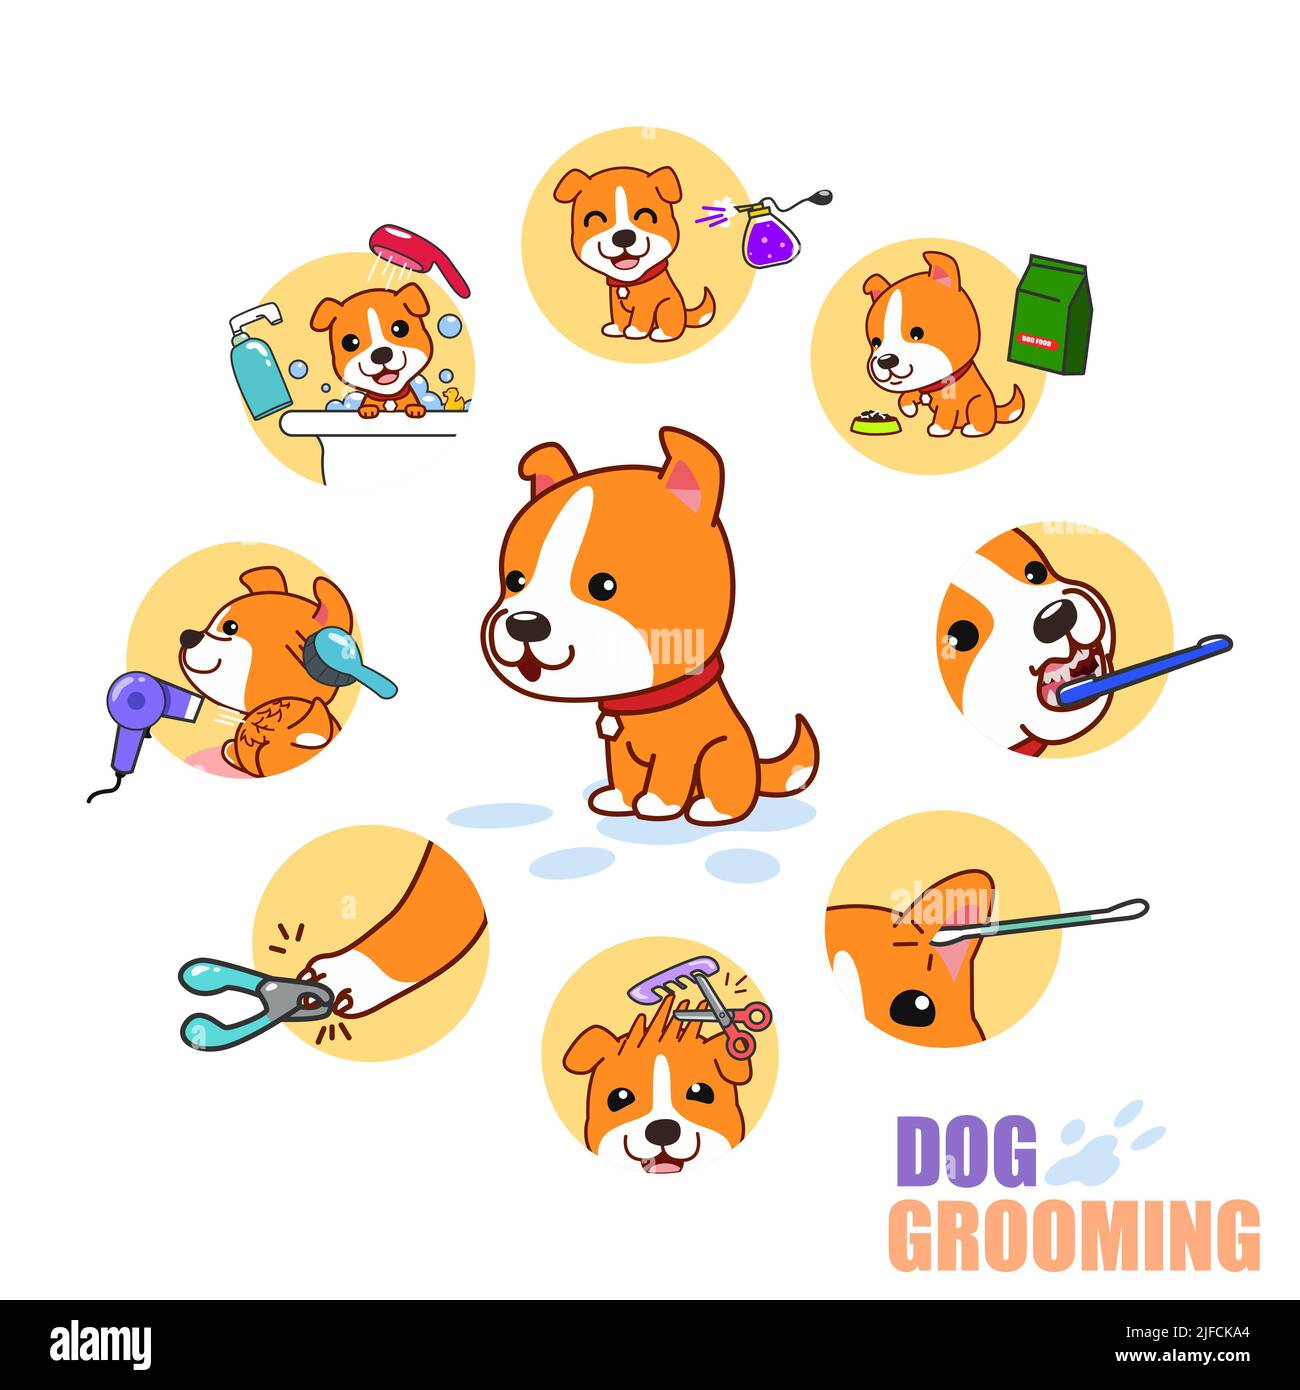 A vector illustration of Cartoon Dog Grooming Icons Stock Vector